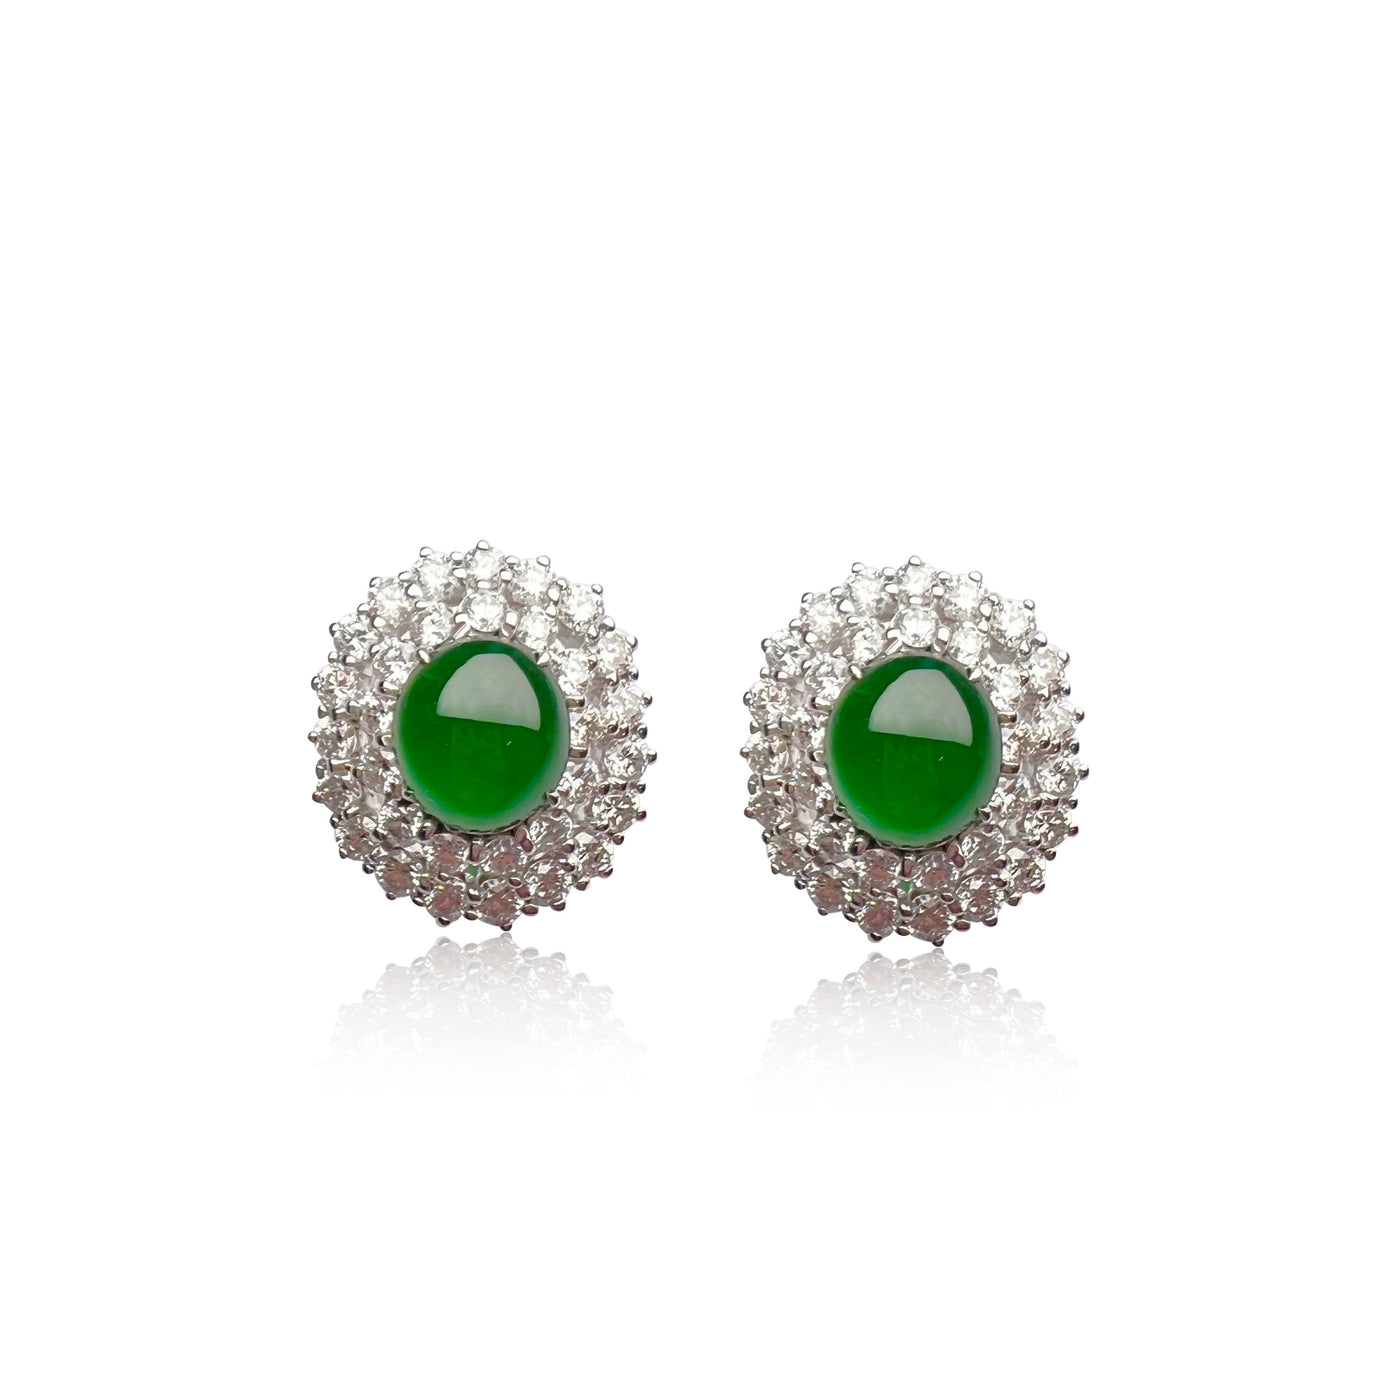 Jadeite Cabochon Earrings in 18K White Gold and Diamonds